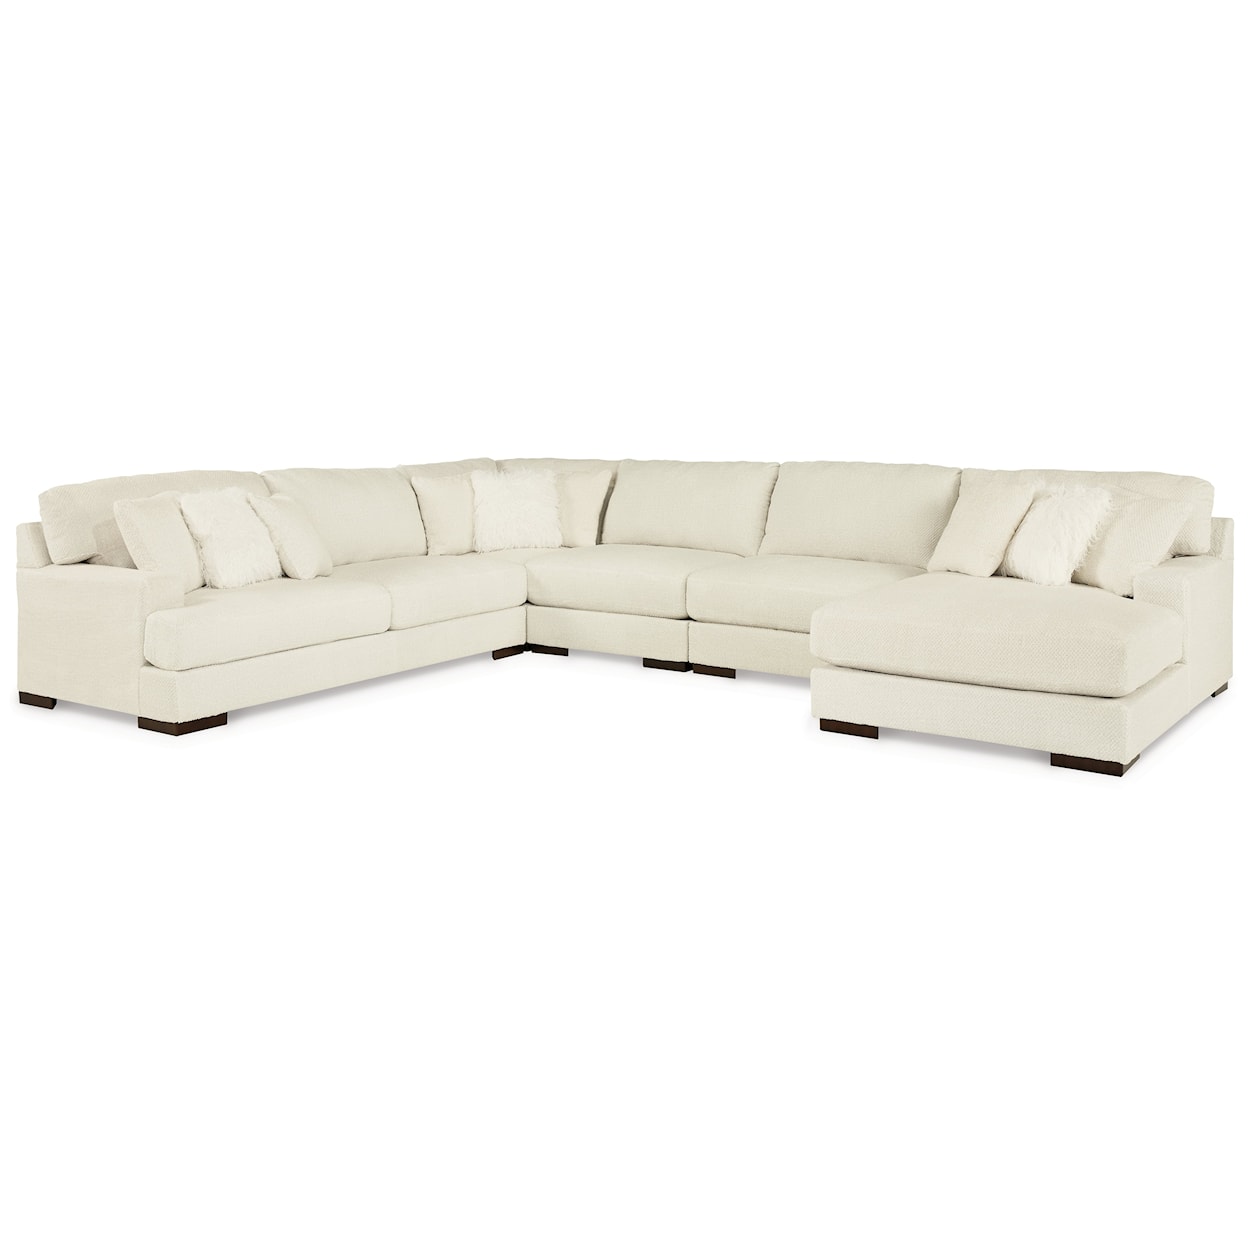 Signature Design Zada 5-Piece Sectional with Chaise